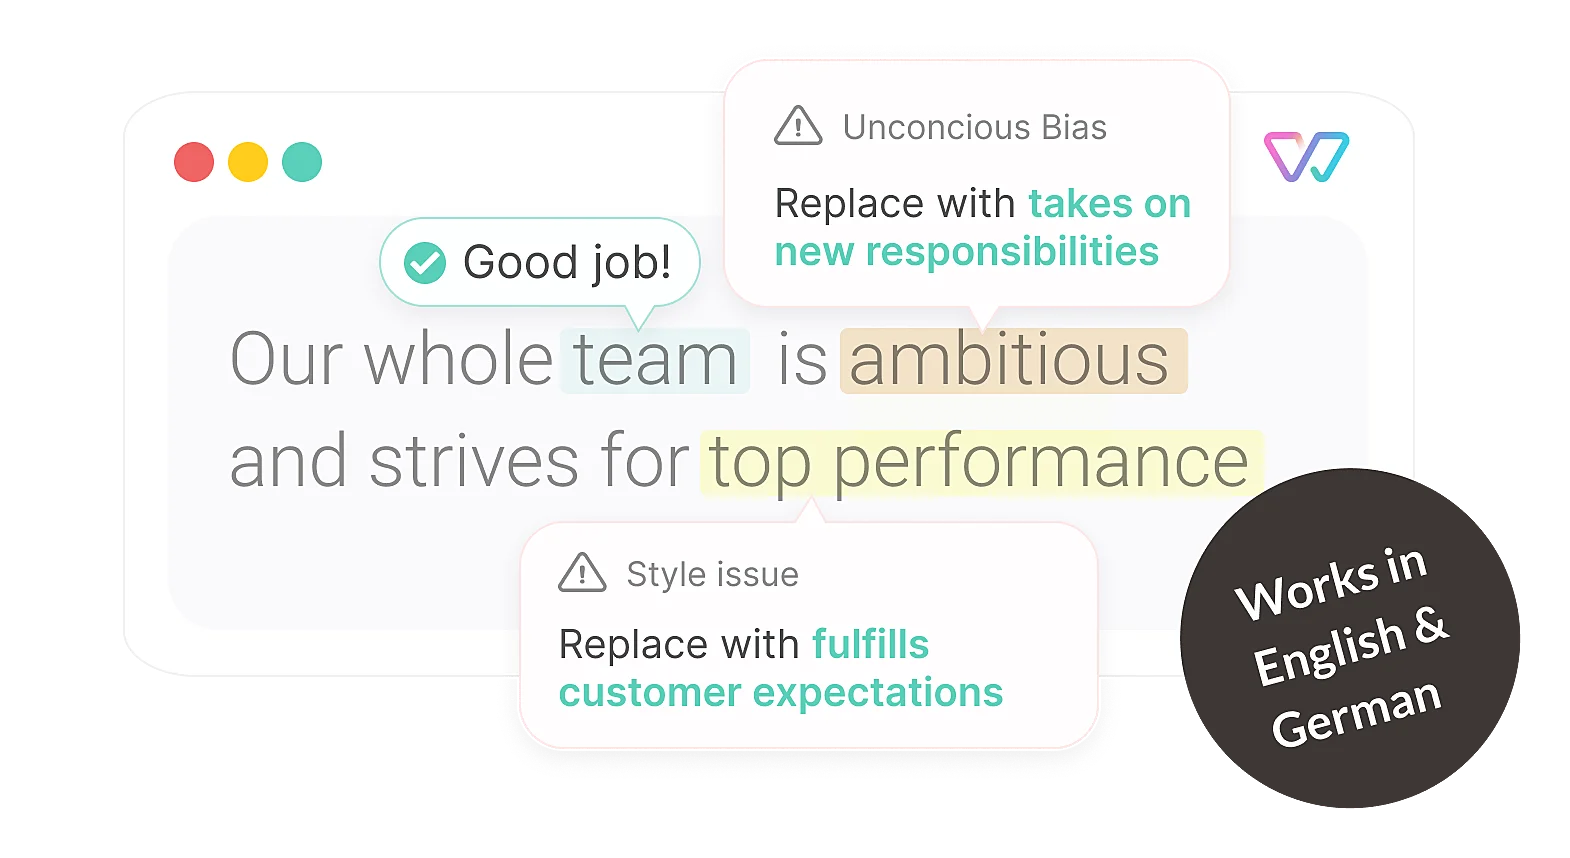 Our whole team (→ that is communal and thus a “good job” icon is shown) is ambitious (replaced with “takes on new responsibilities”; label: unconscious bias) and strives for top performance (replaced with “fulfills customer expectations”; label: style).